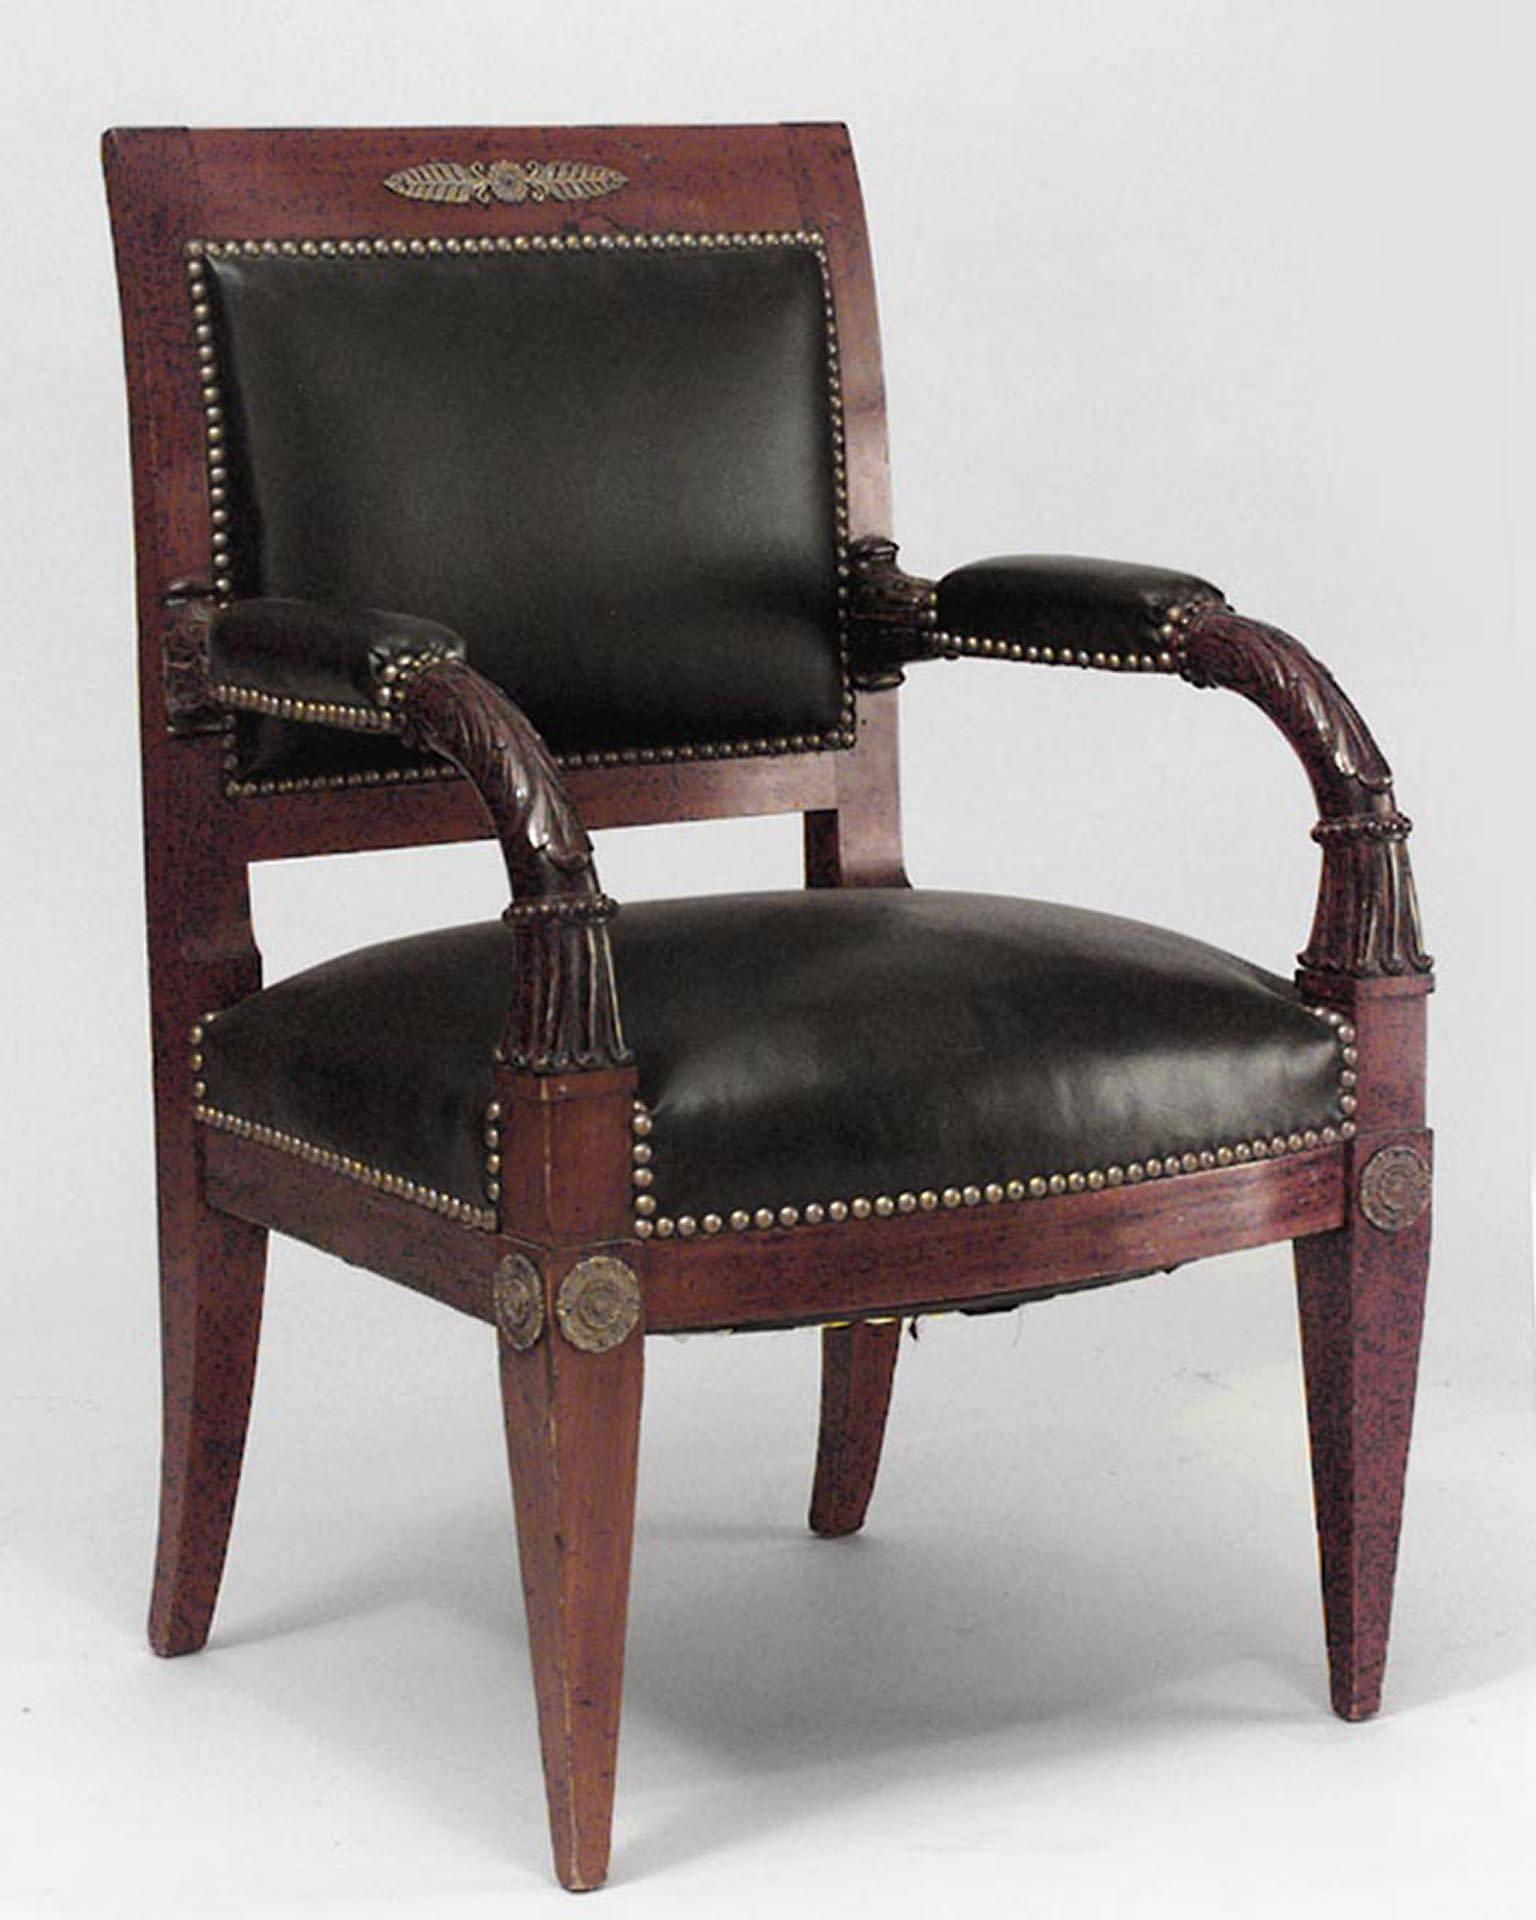 Pair of French Empire style (19th Cent) mahogany and bronze trimmed Armchairs with black leather seat and back.
